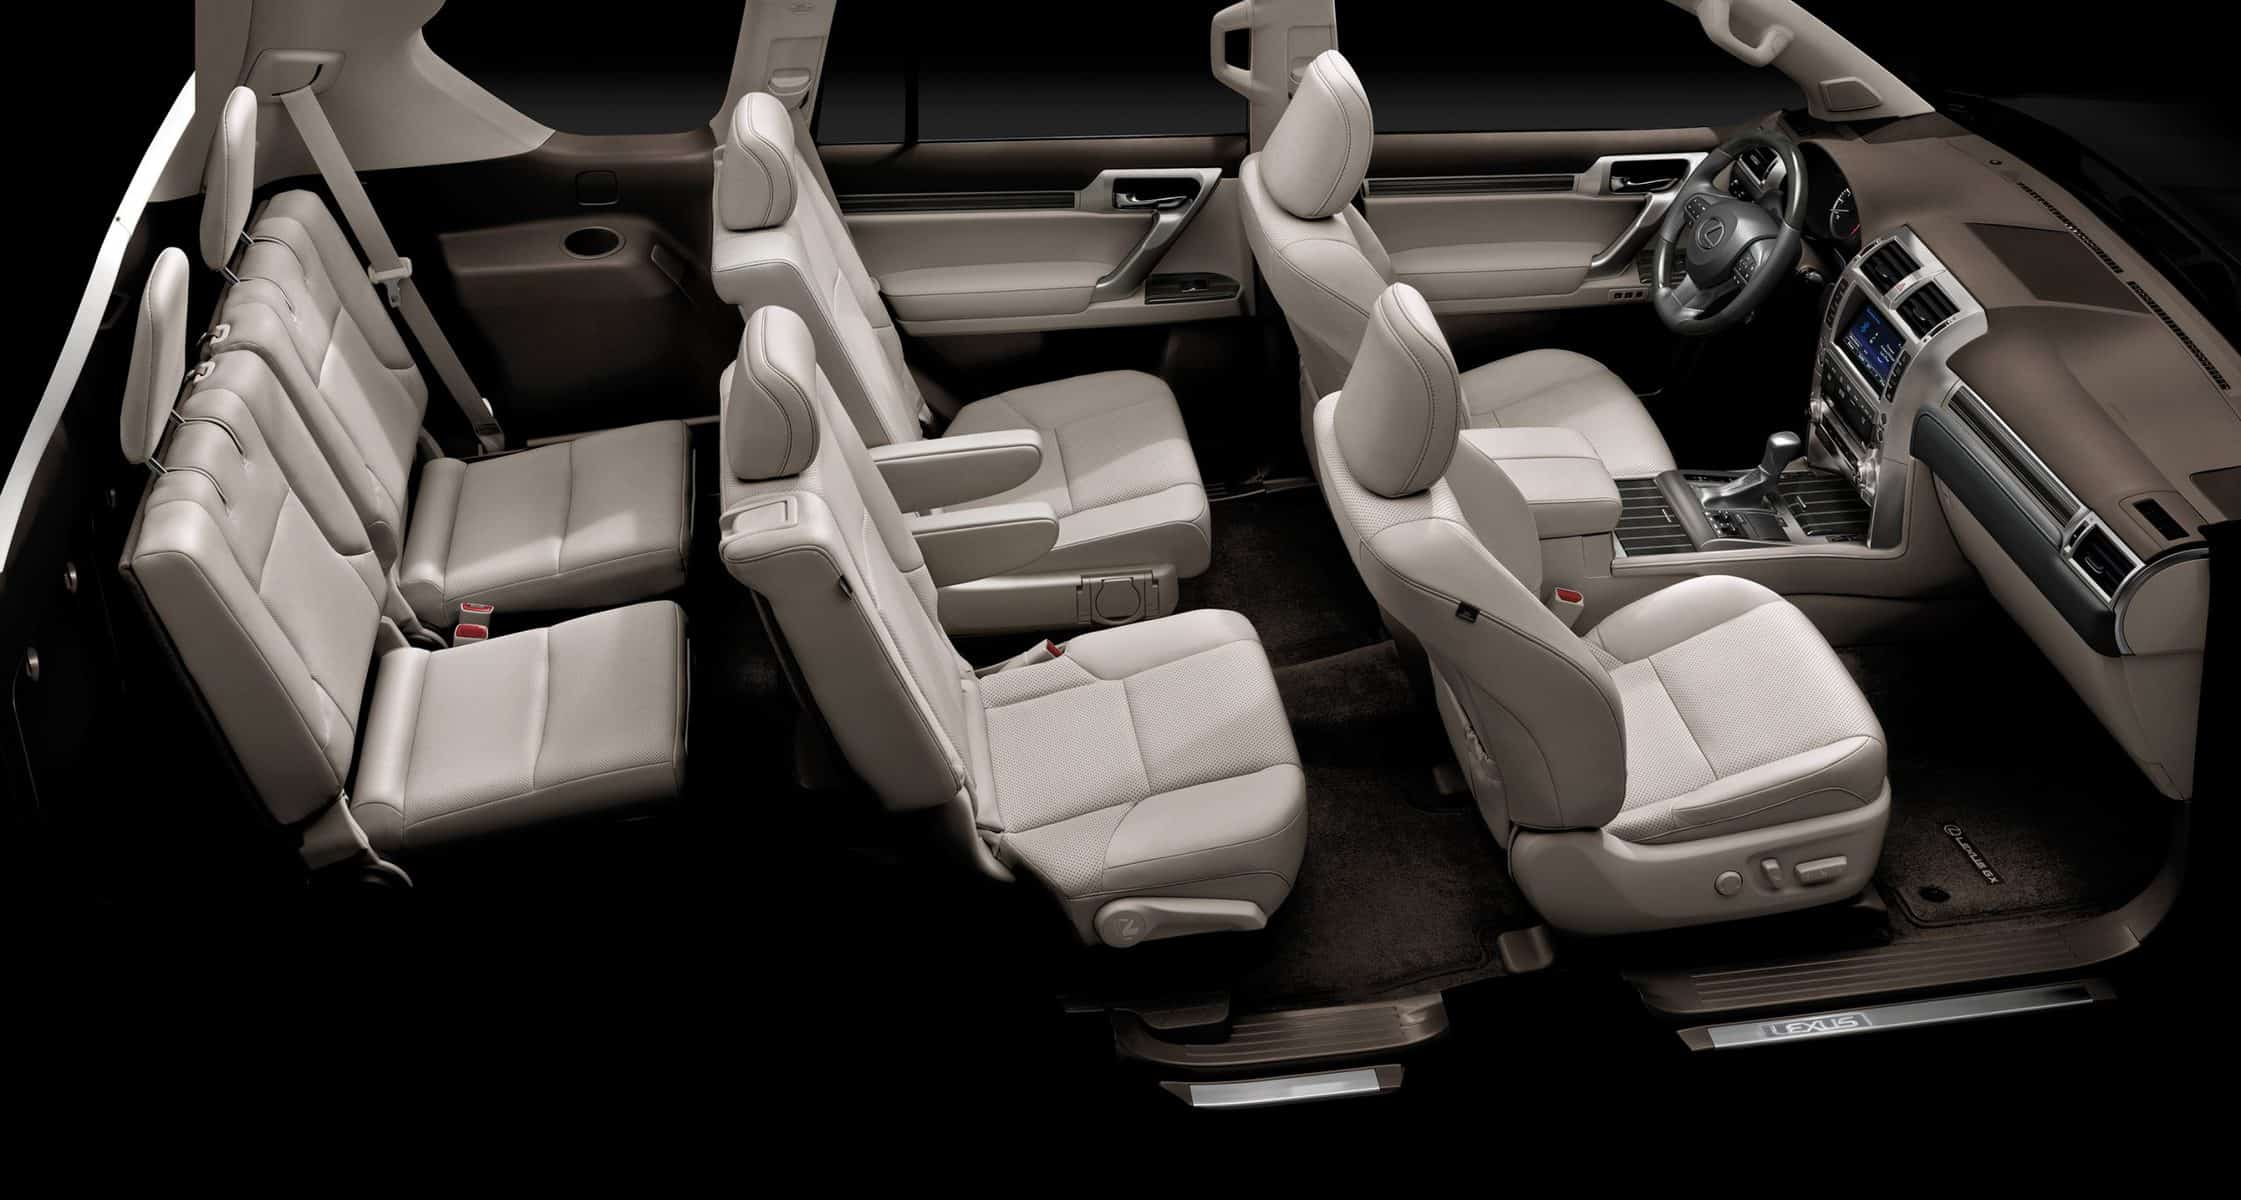 Which 7 Seater SUV Has the Most Room?